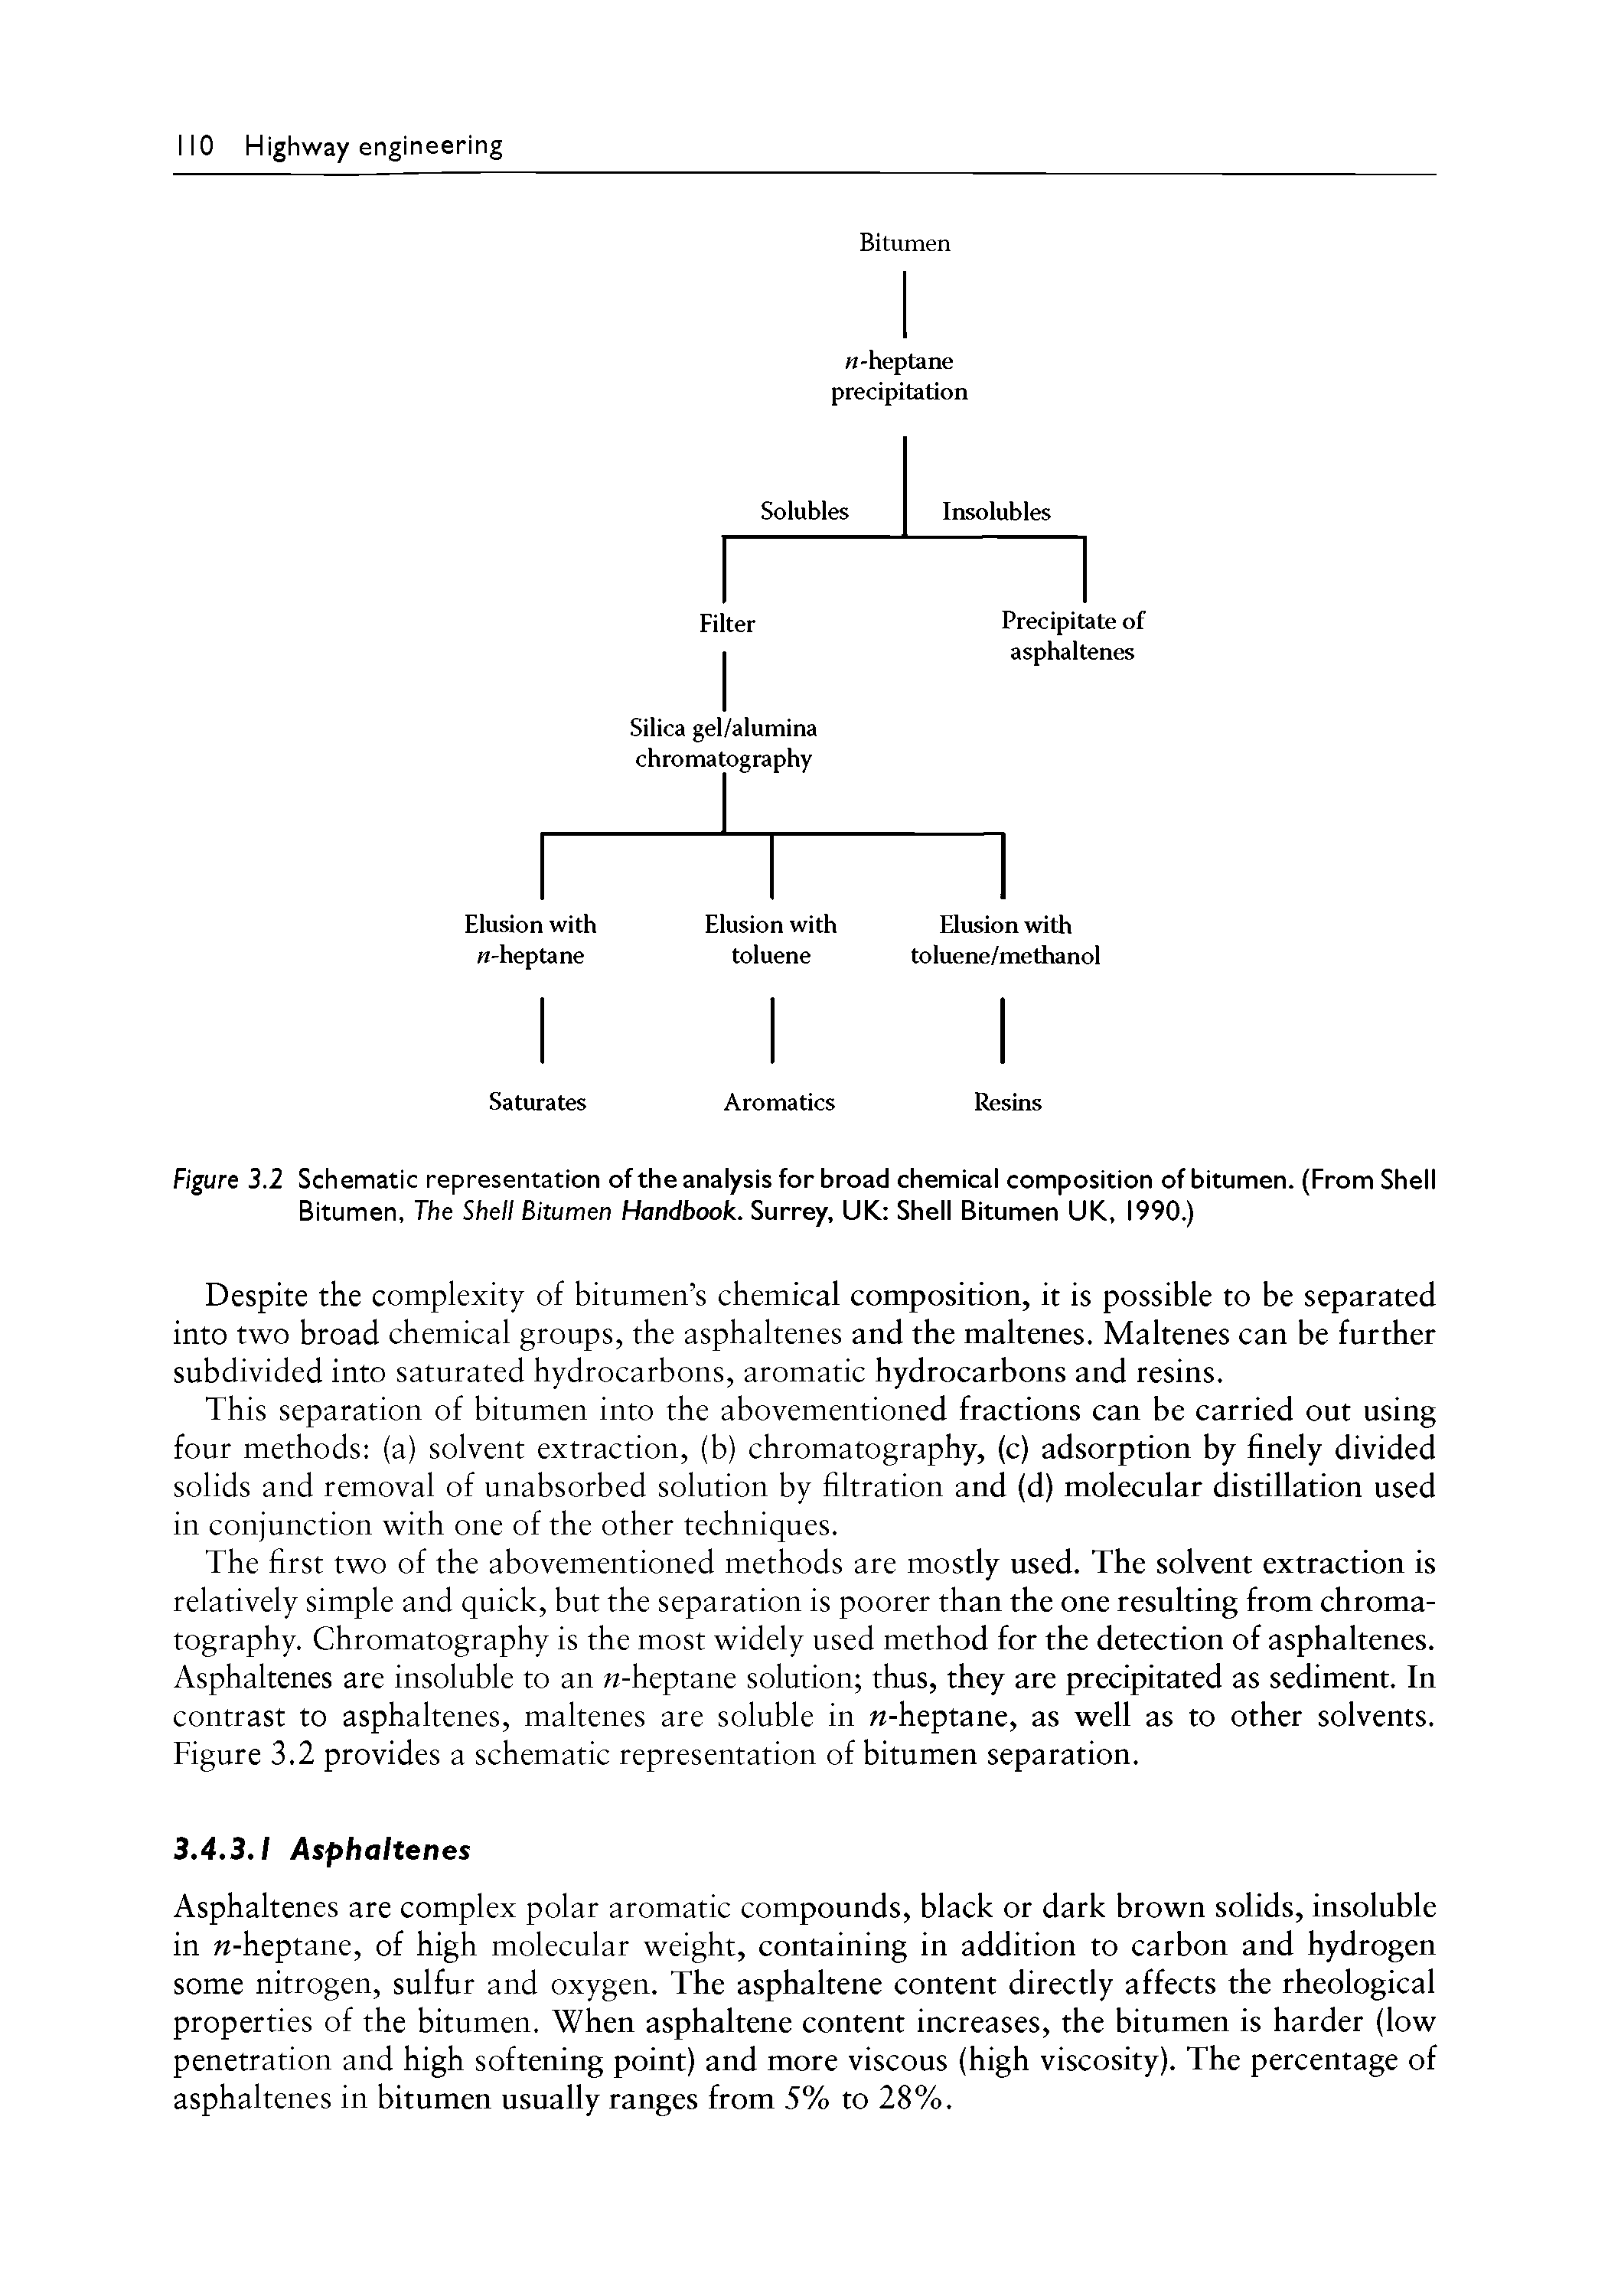 Figure 3.2 Schematic representation of the anaiysis for broad chemical composition of bitumen. (From Shell Bitumen, The Shell Bitumen Handbook. Surrey, UK Shell Bitumen UK, 1990.)...